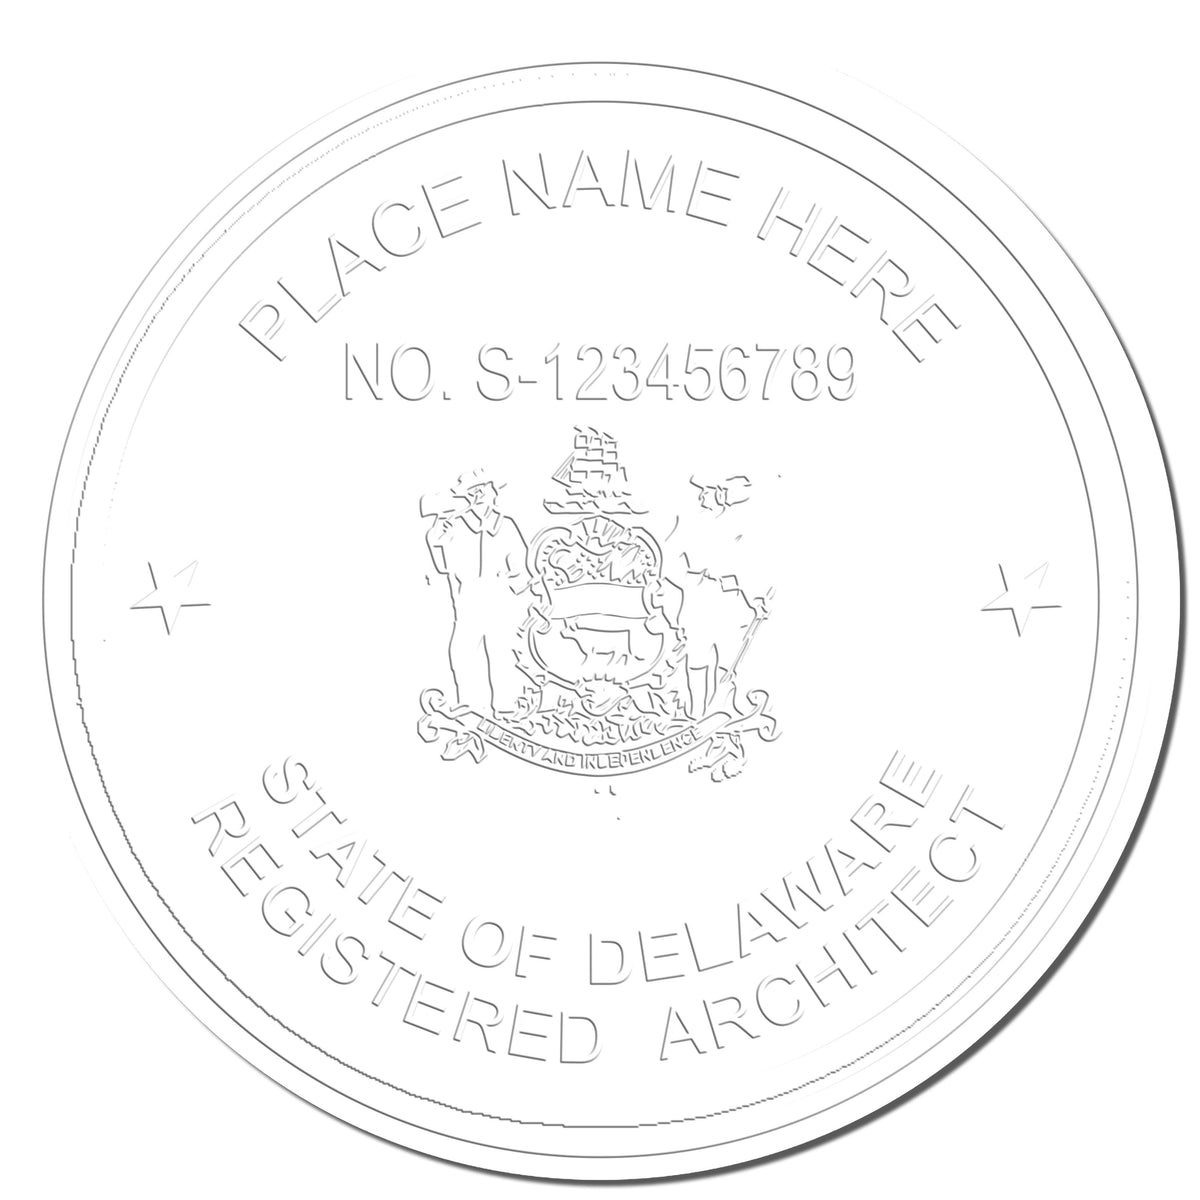 A photograph of the Delaware Desk Architect Embossing Seal stamp impression reveals a vivid, professional image of the on paper.